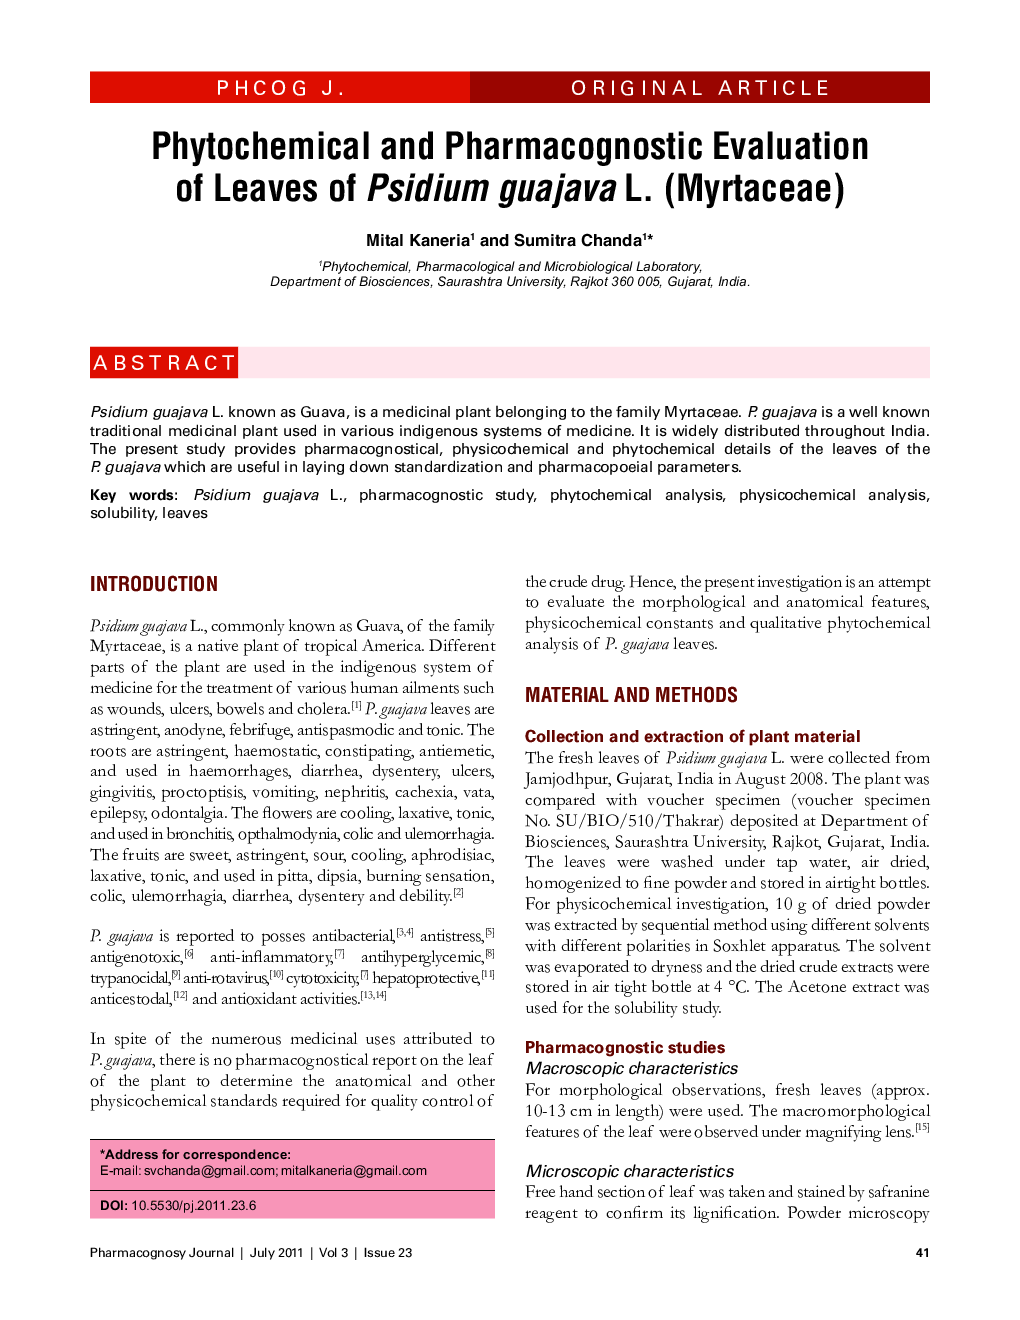 Phytochemical and Pharmacognostic Evaluation of Leaves of Psidium guajava L. (Myrtaceae)